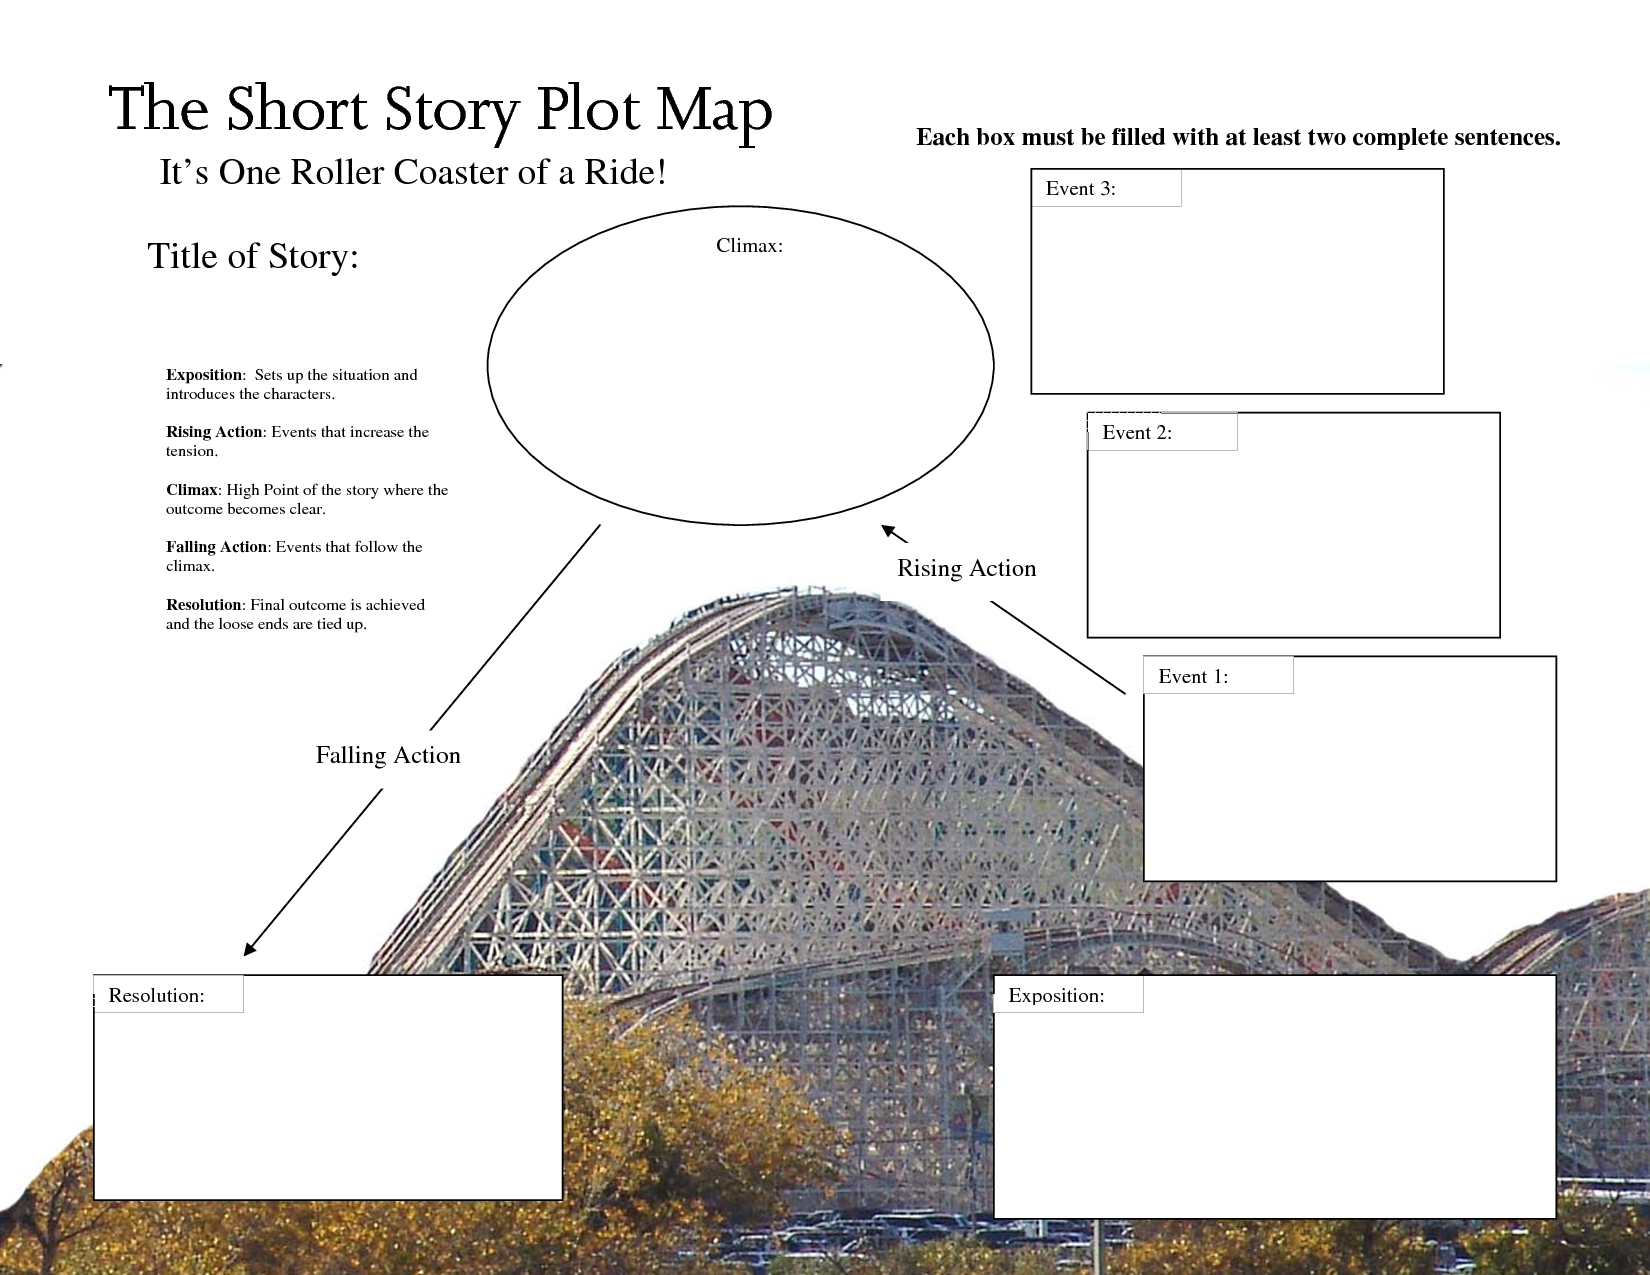 instructions on how to write a short story